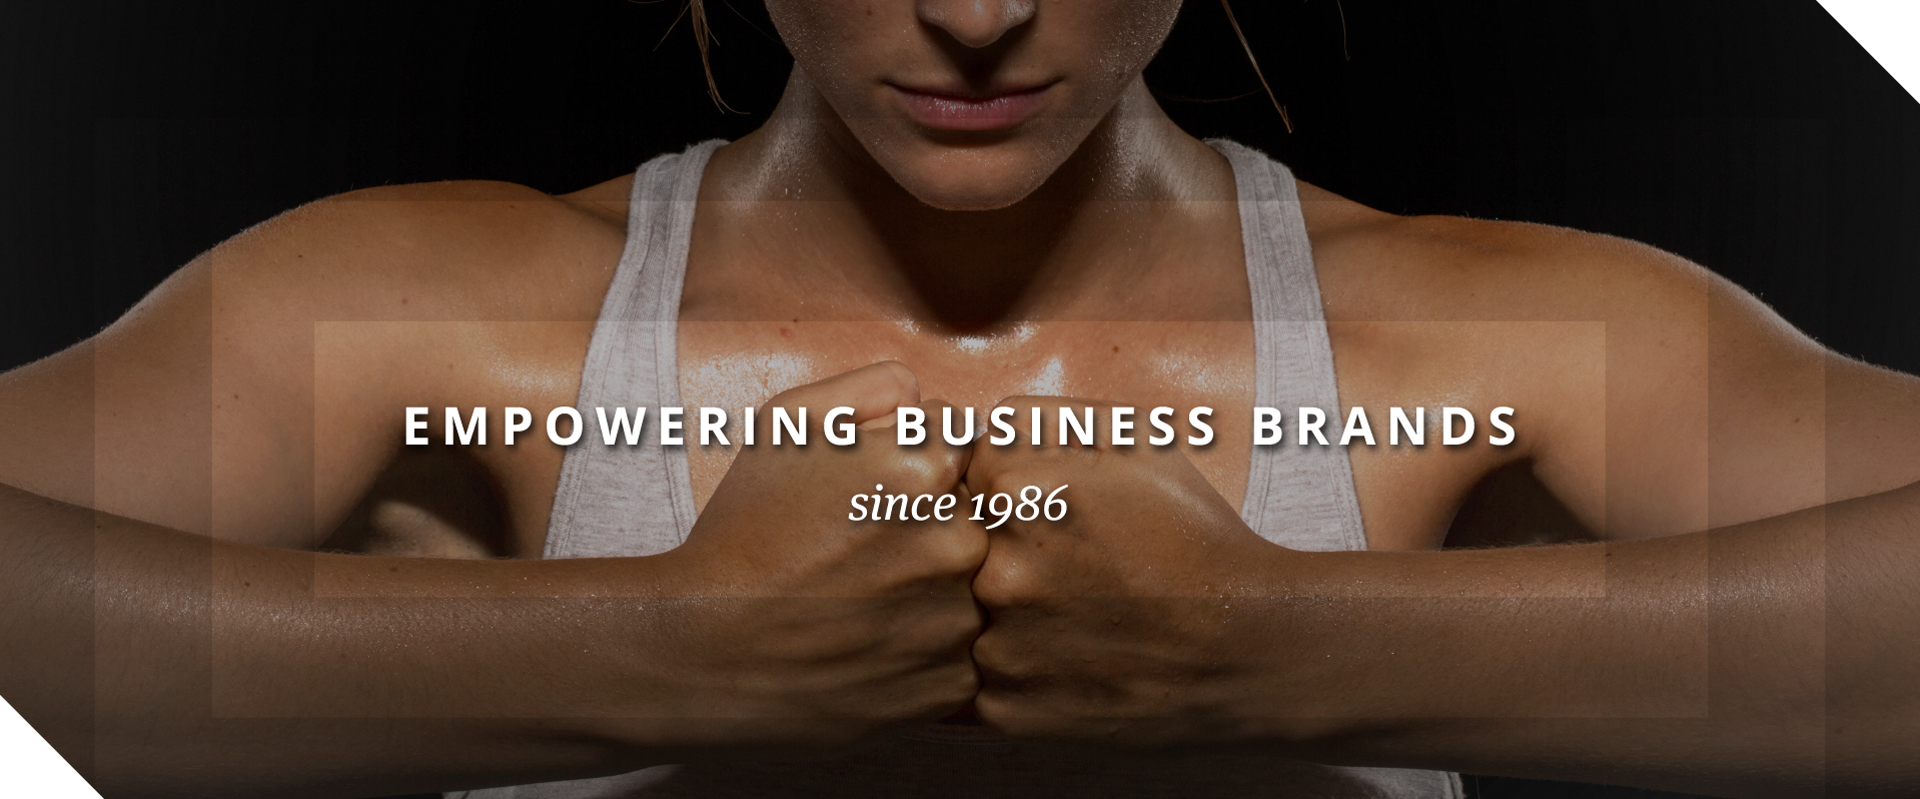 Empowering business brands since 1986